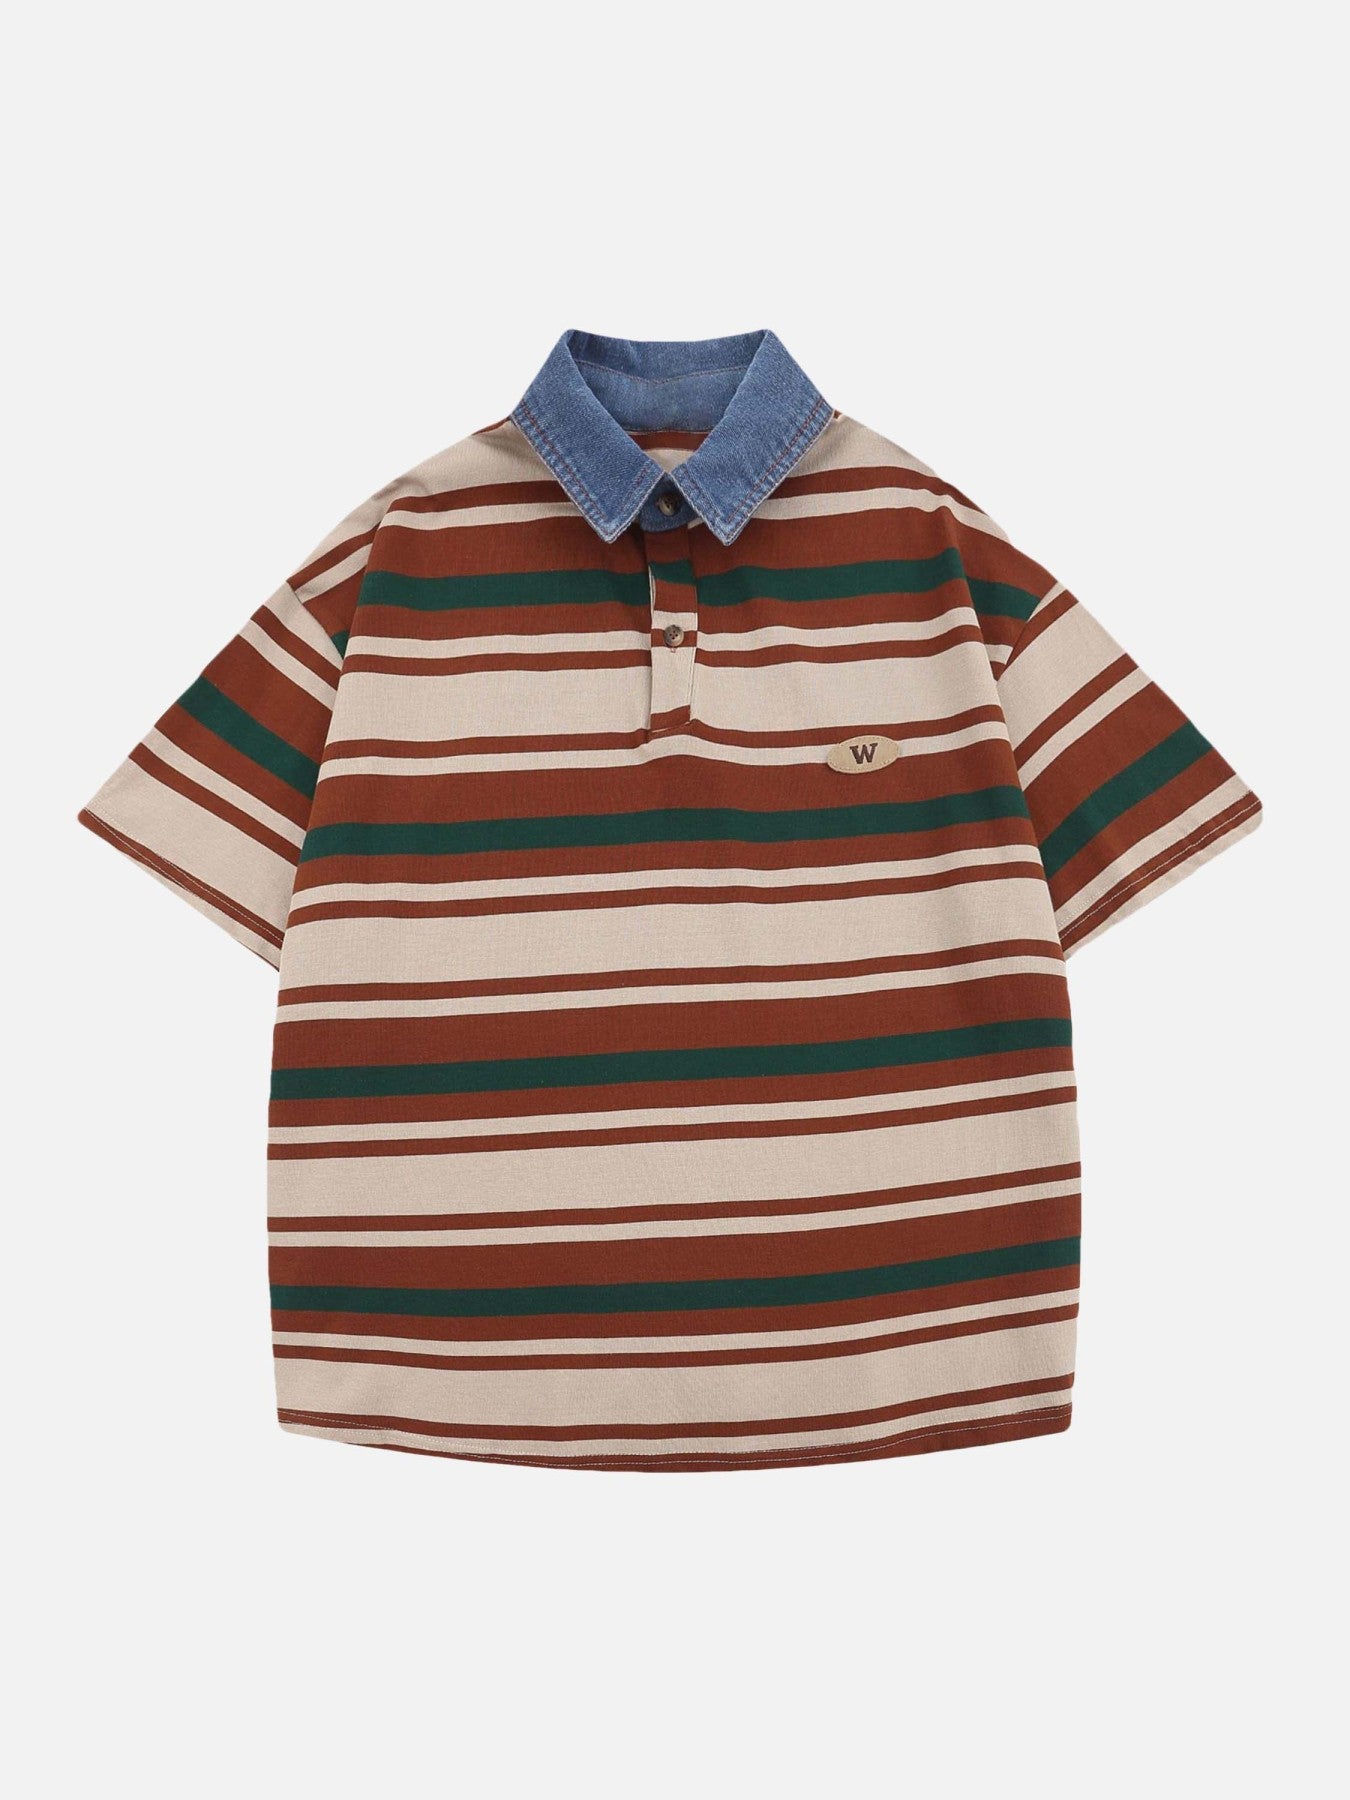 Thesupermade Vintage Striped Polo Shirt